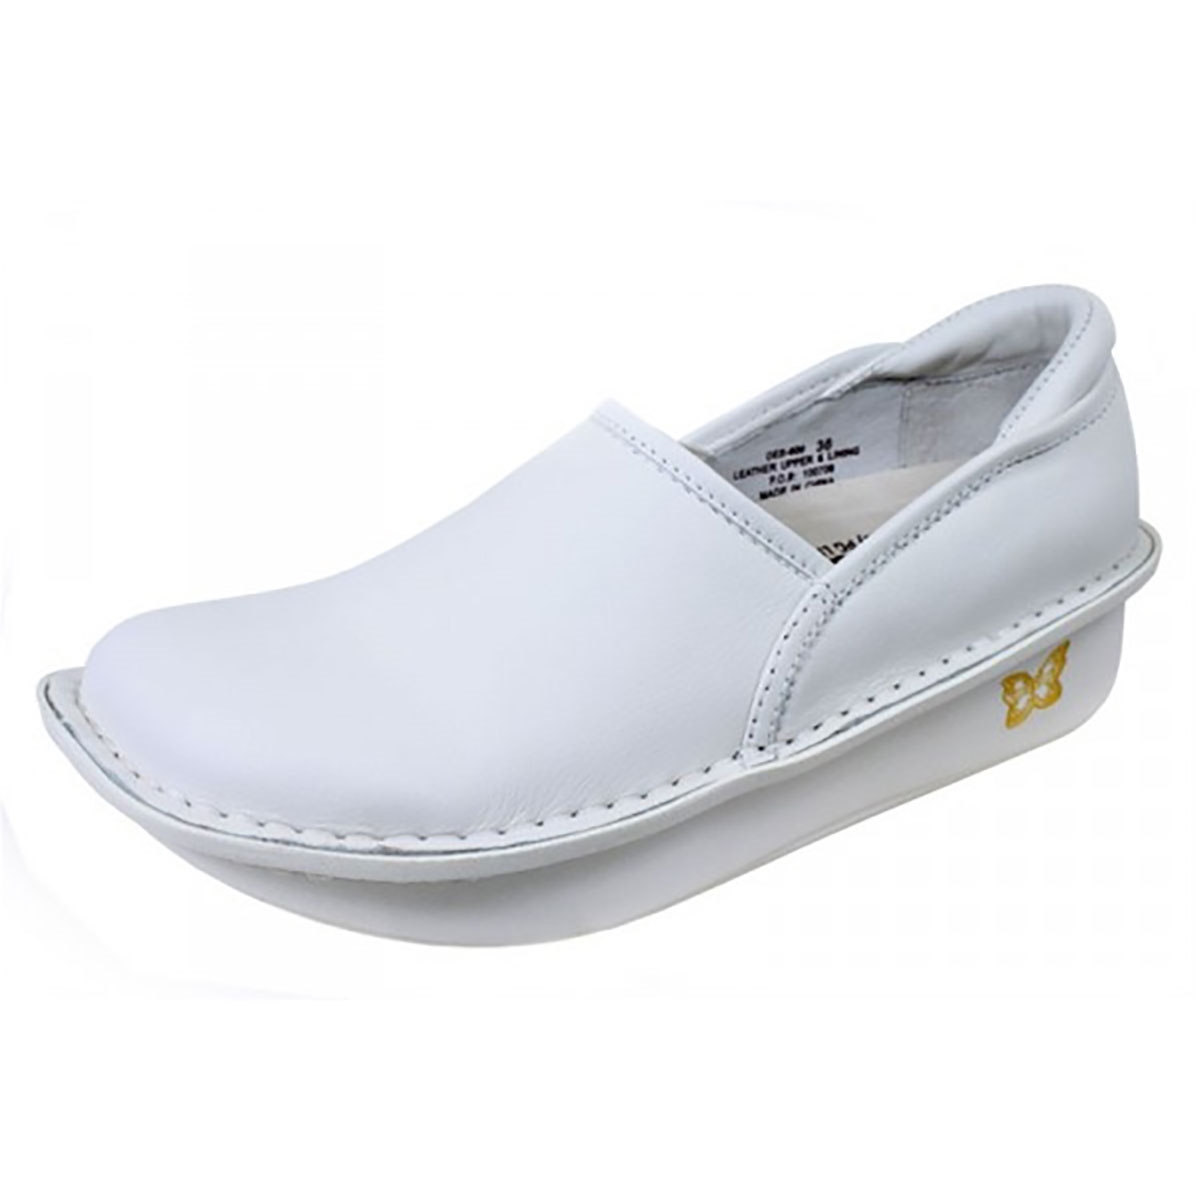 all white leather sneakers for nursing